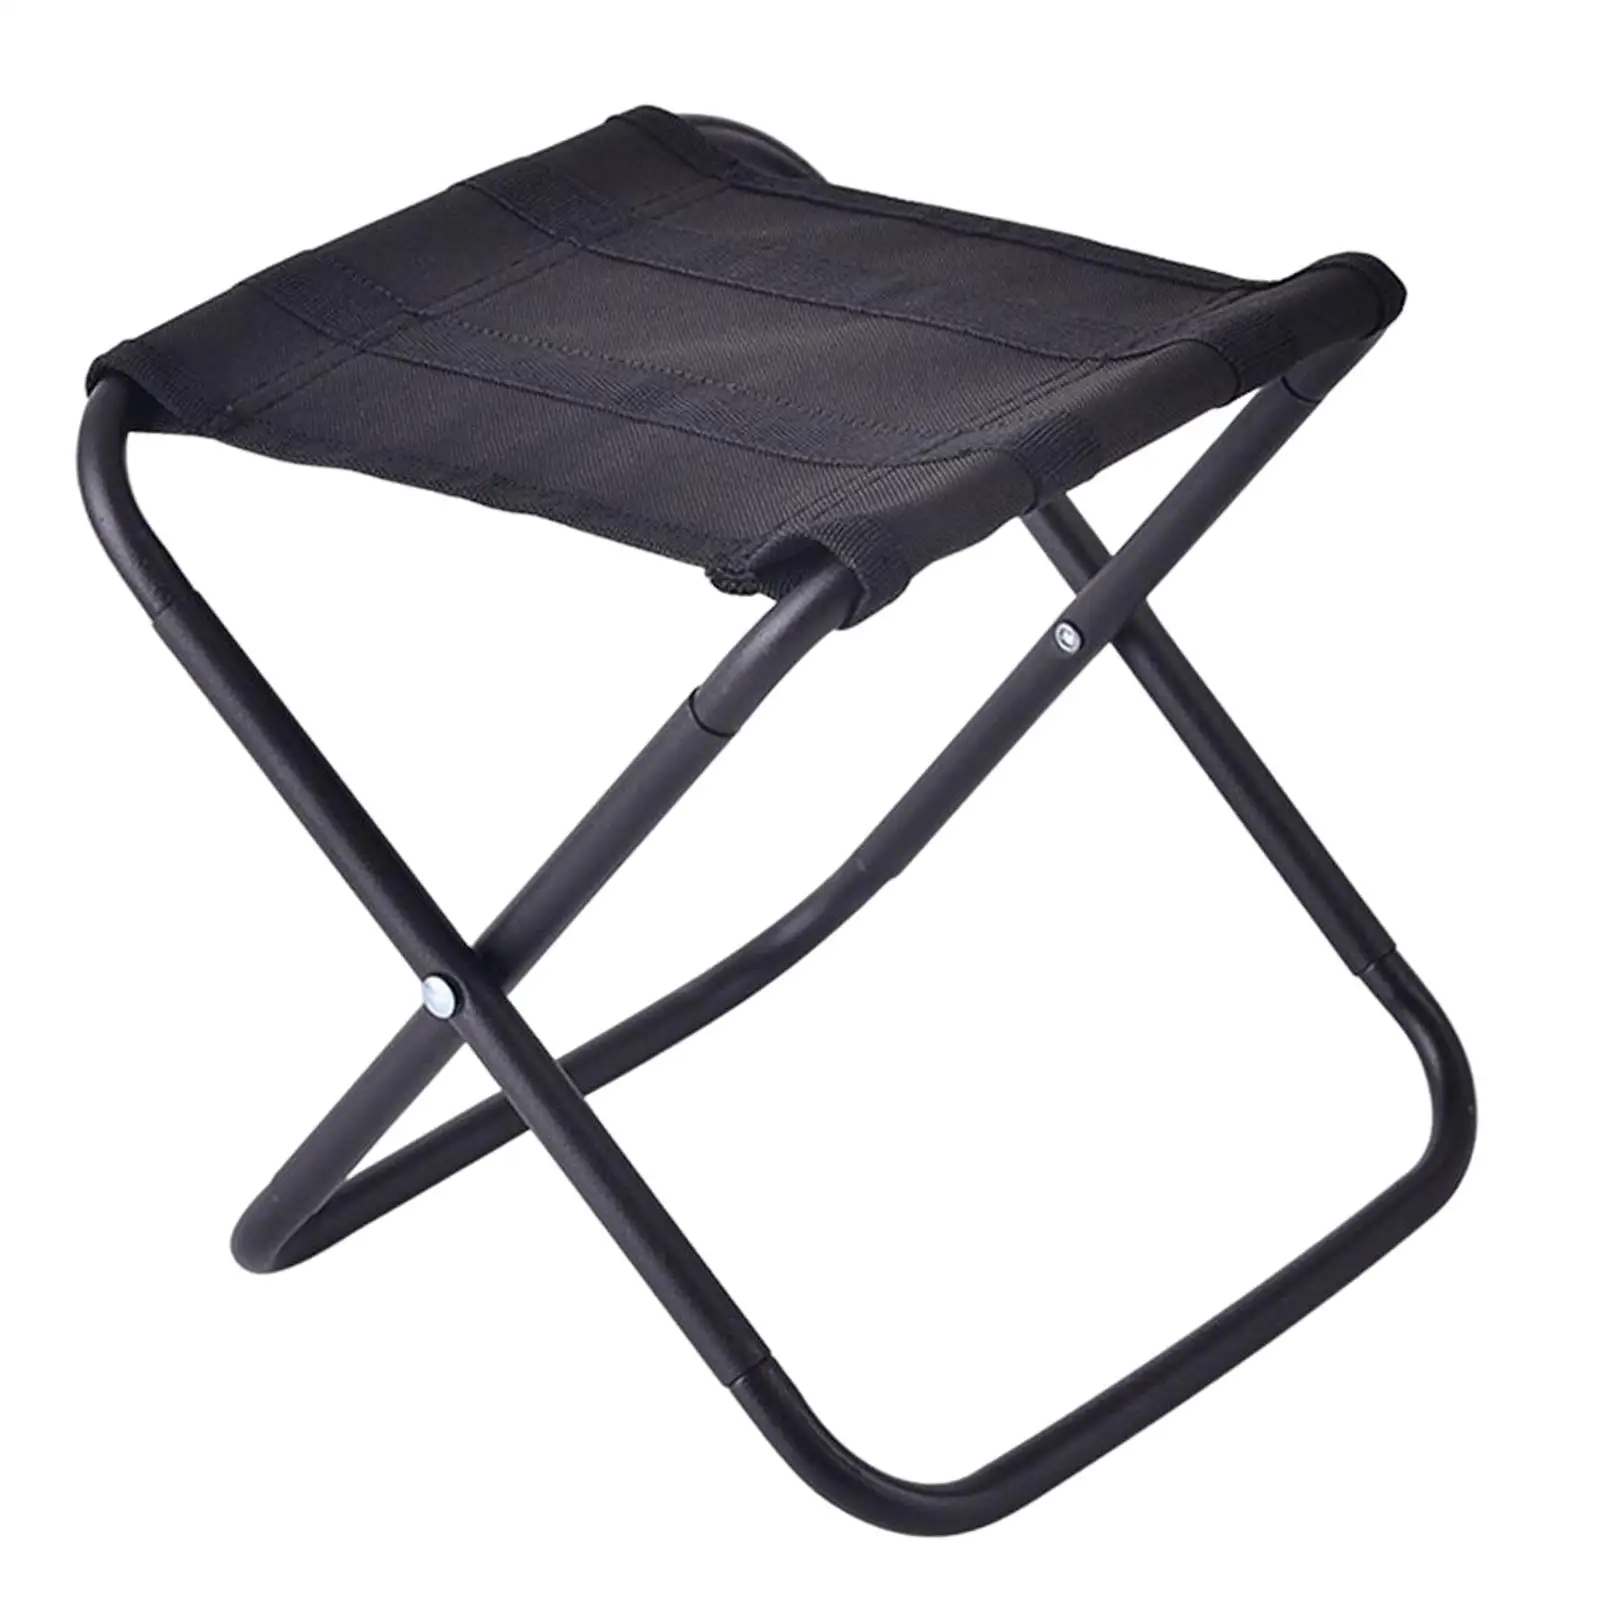 Adult Camping Stool Aluminum Alloy Collapsible Chair Footrest Compact Seat for Fishing Backpacking Lounge Walking Hiking Travel